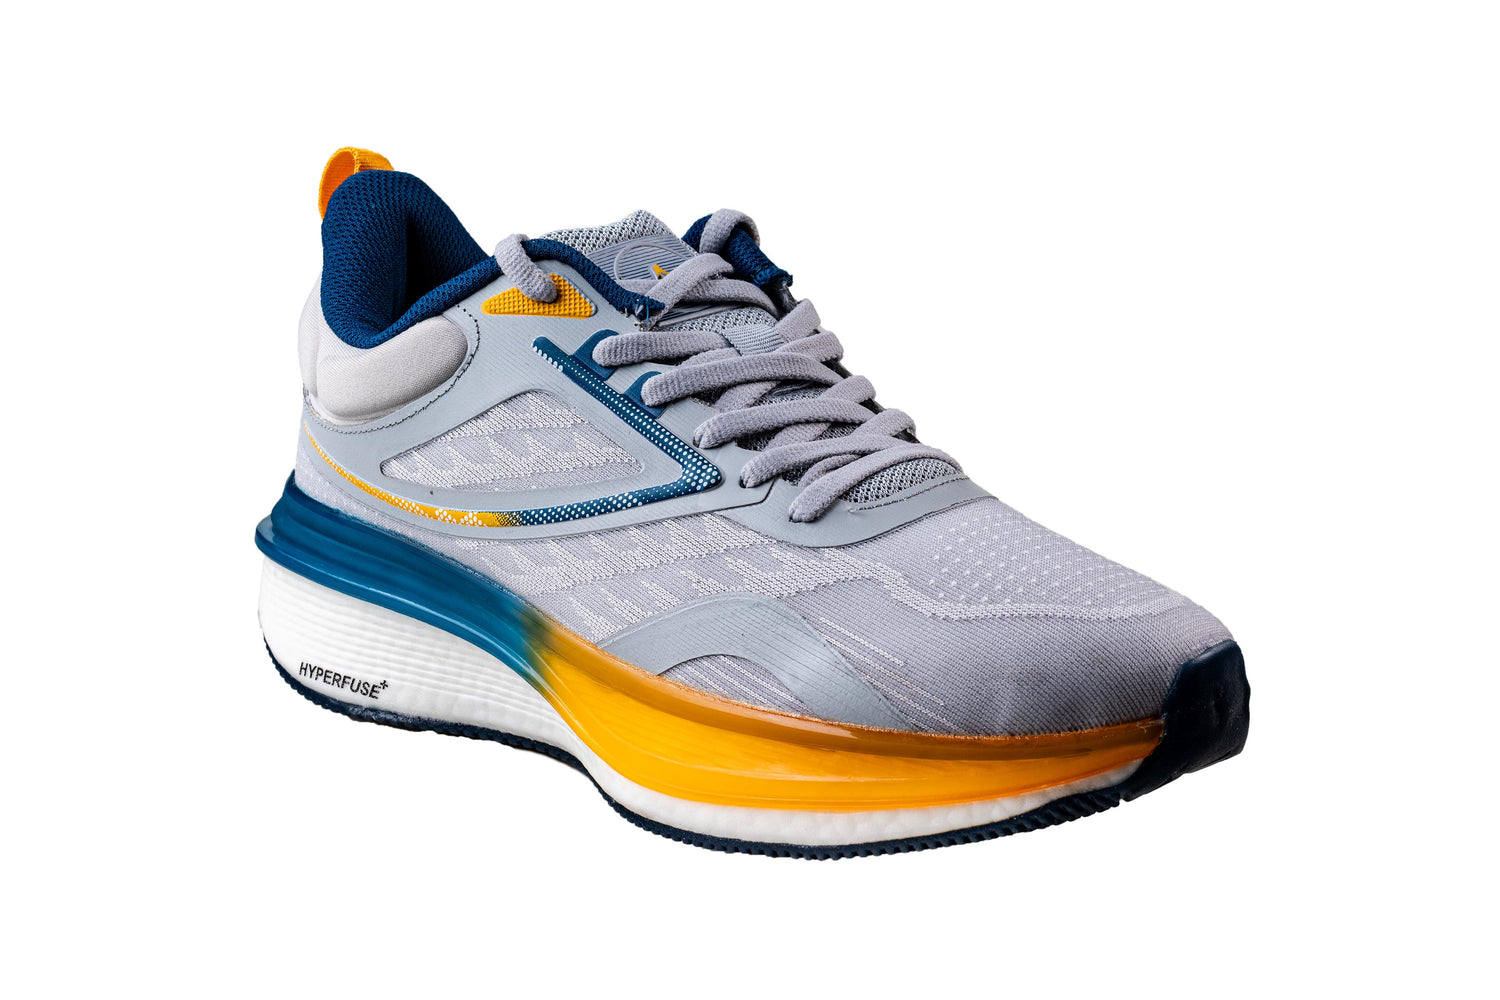 Abros Gents L. Grey / Teal Sports Shoe